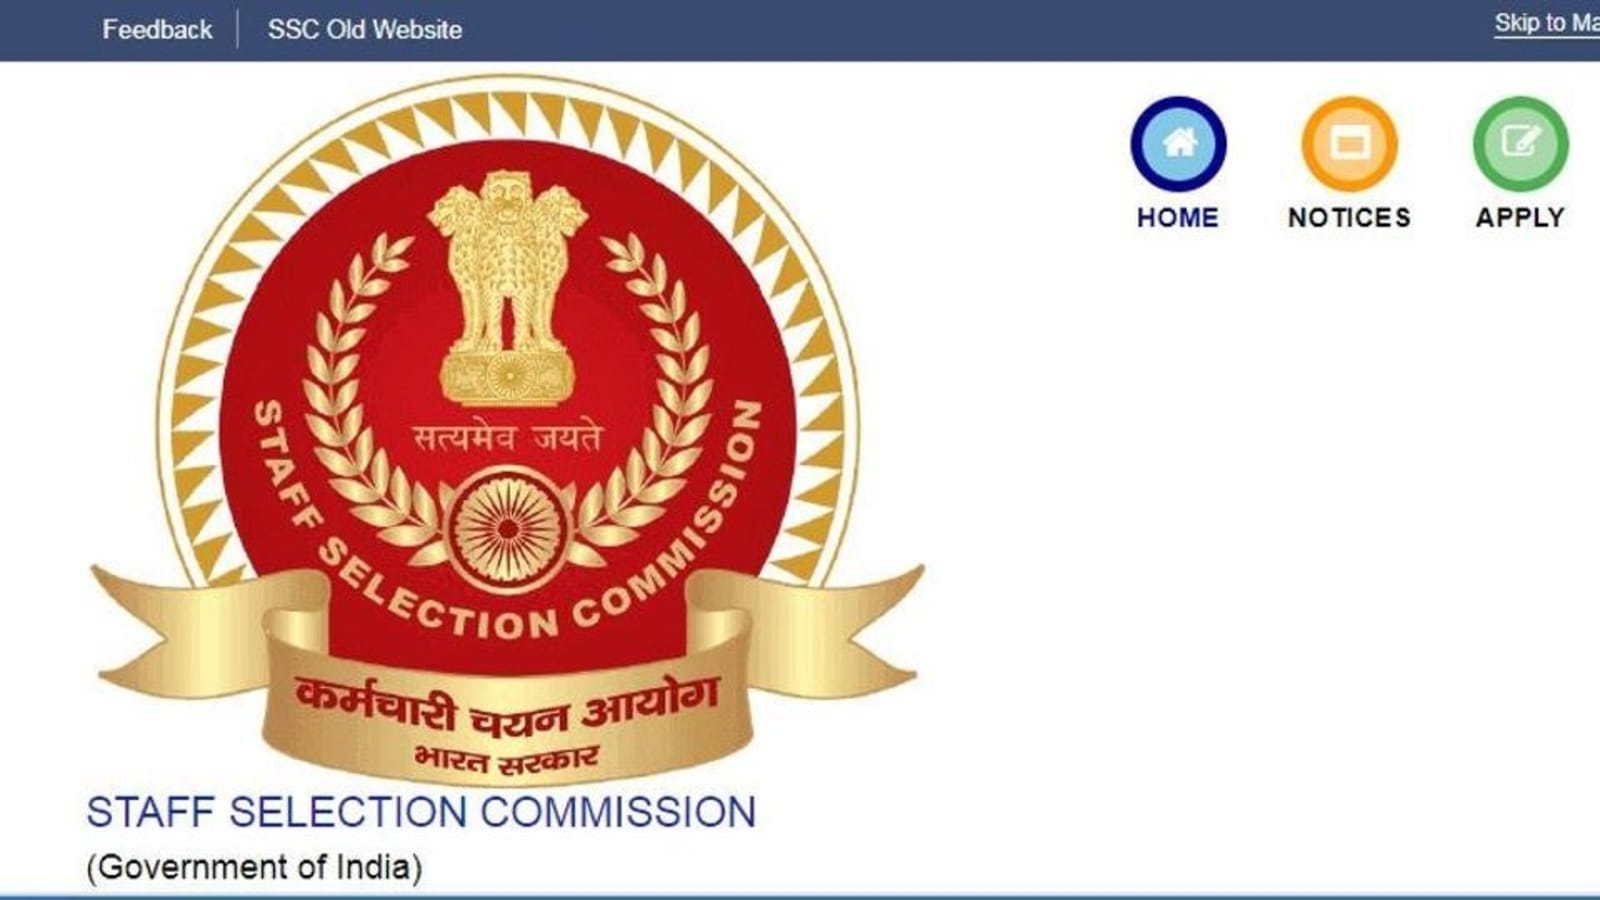 SSC to conduct exit verification for computer-based exams